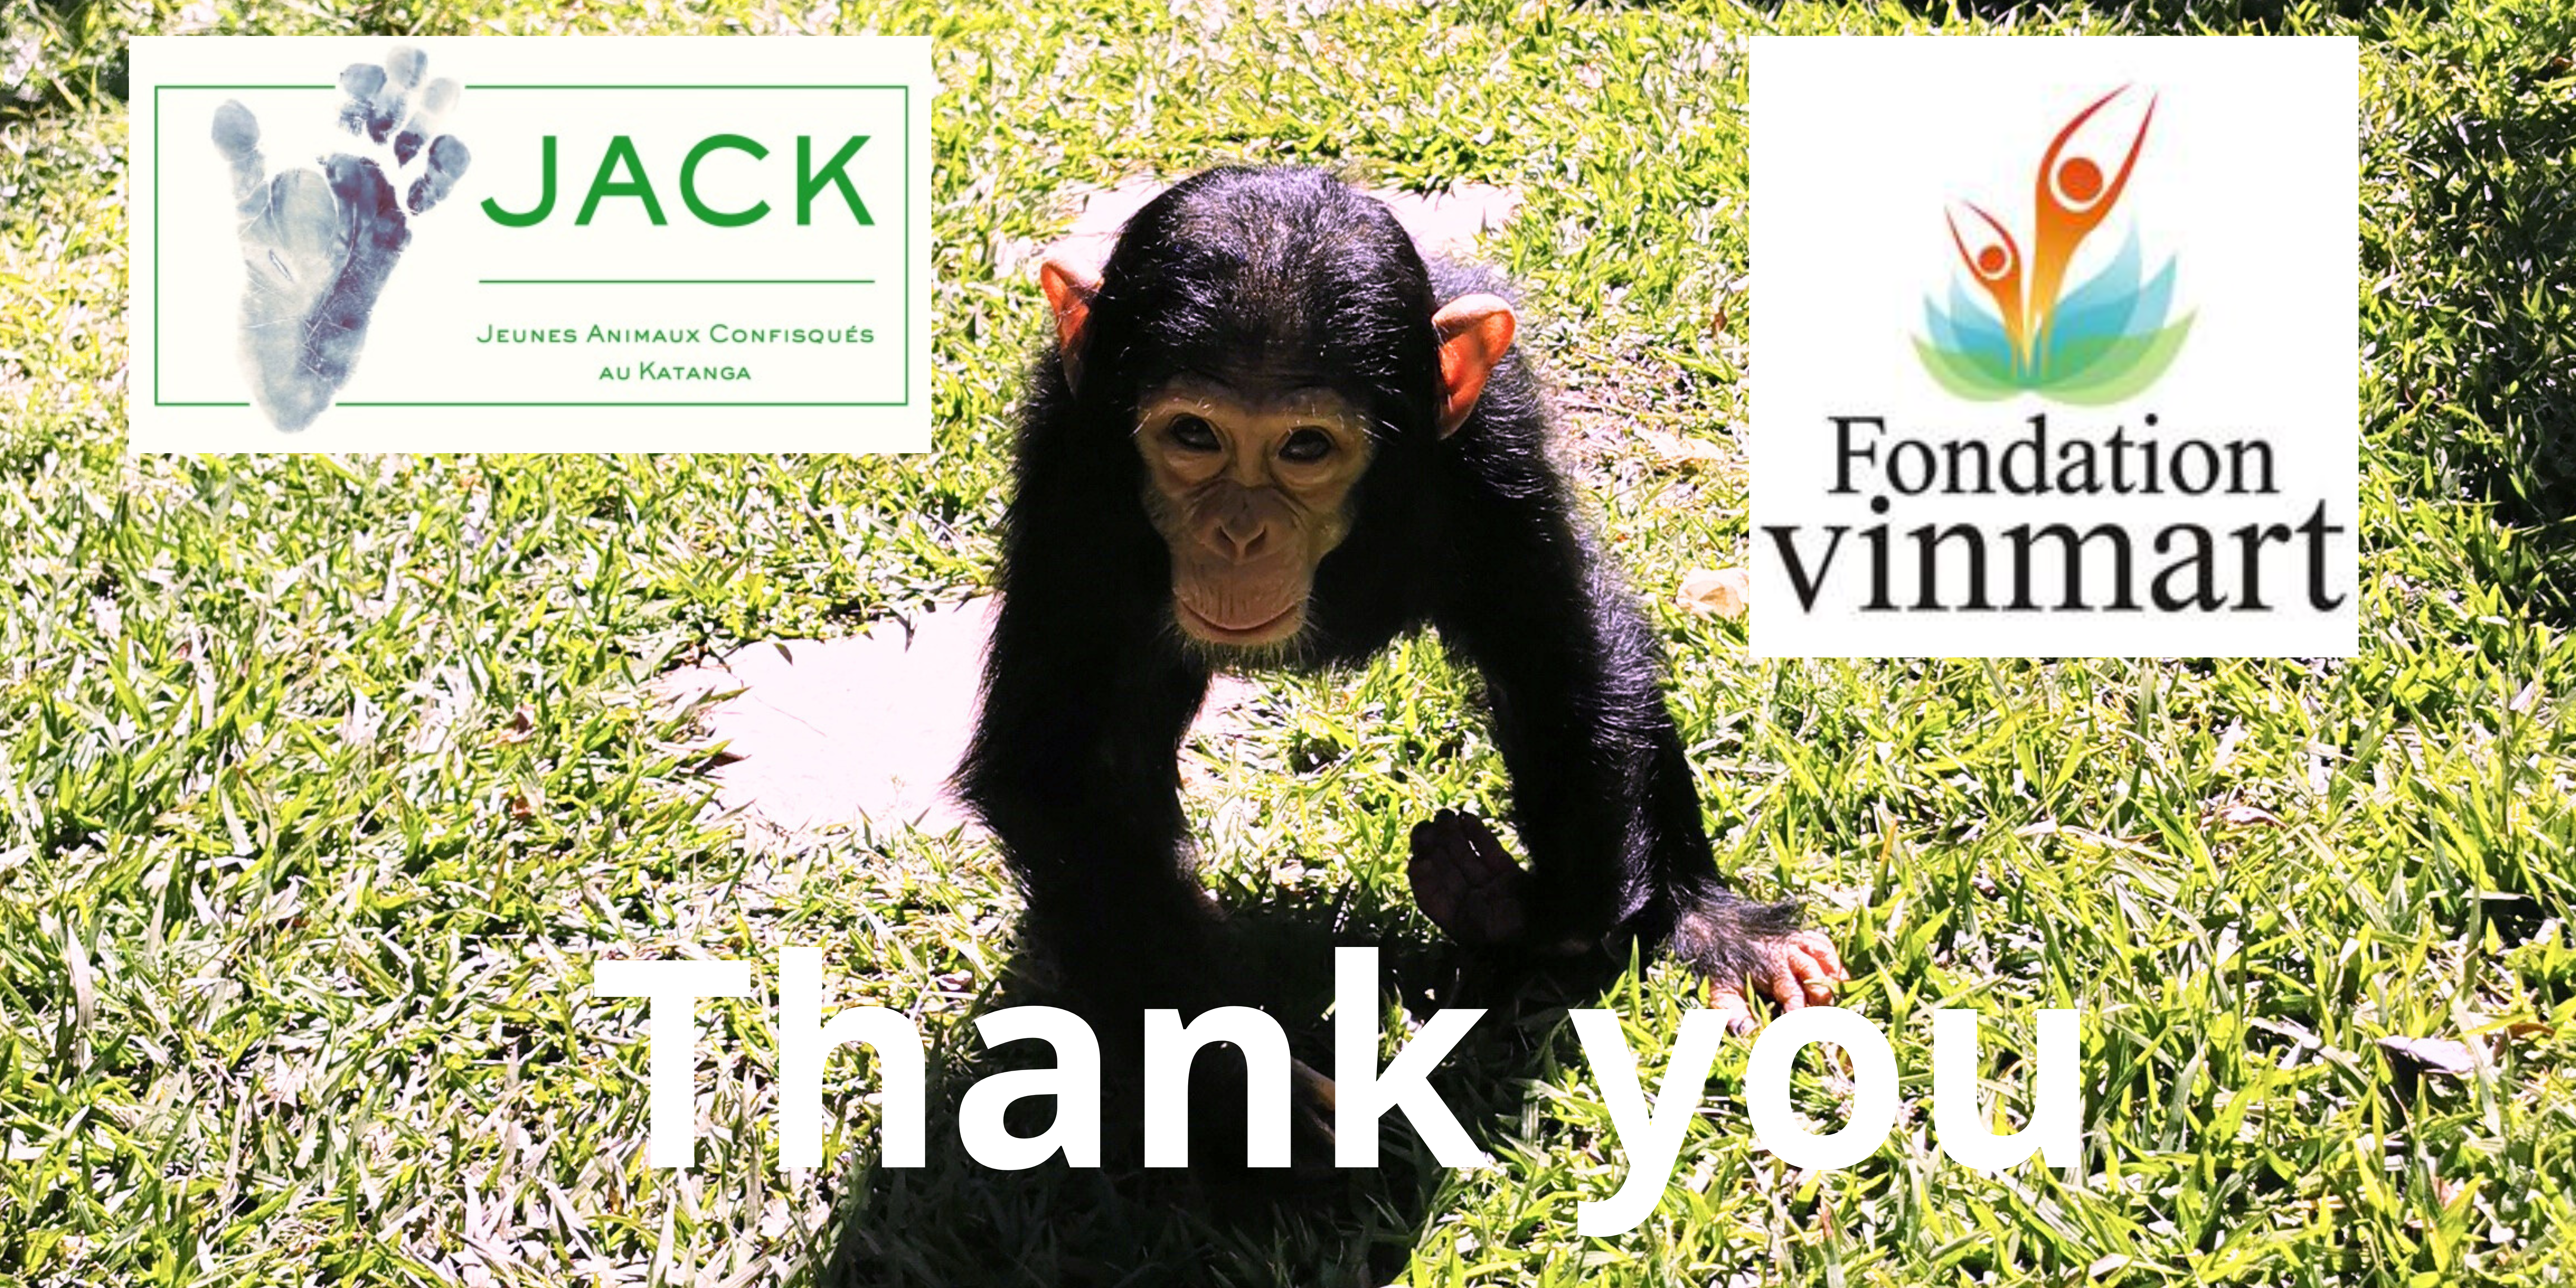 VINMART FOUNDATION, thank you for all your attention to the orphans rescued by J.A.C.K.